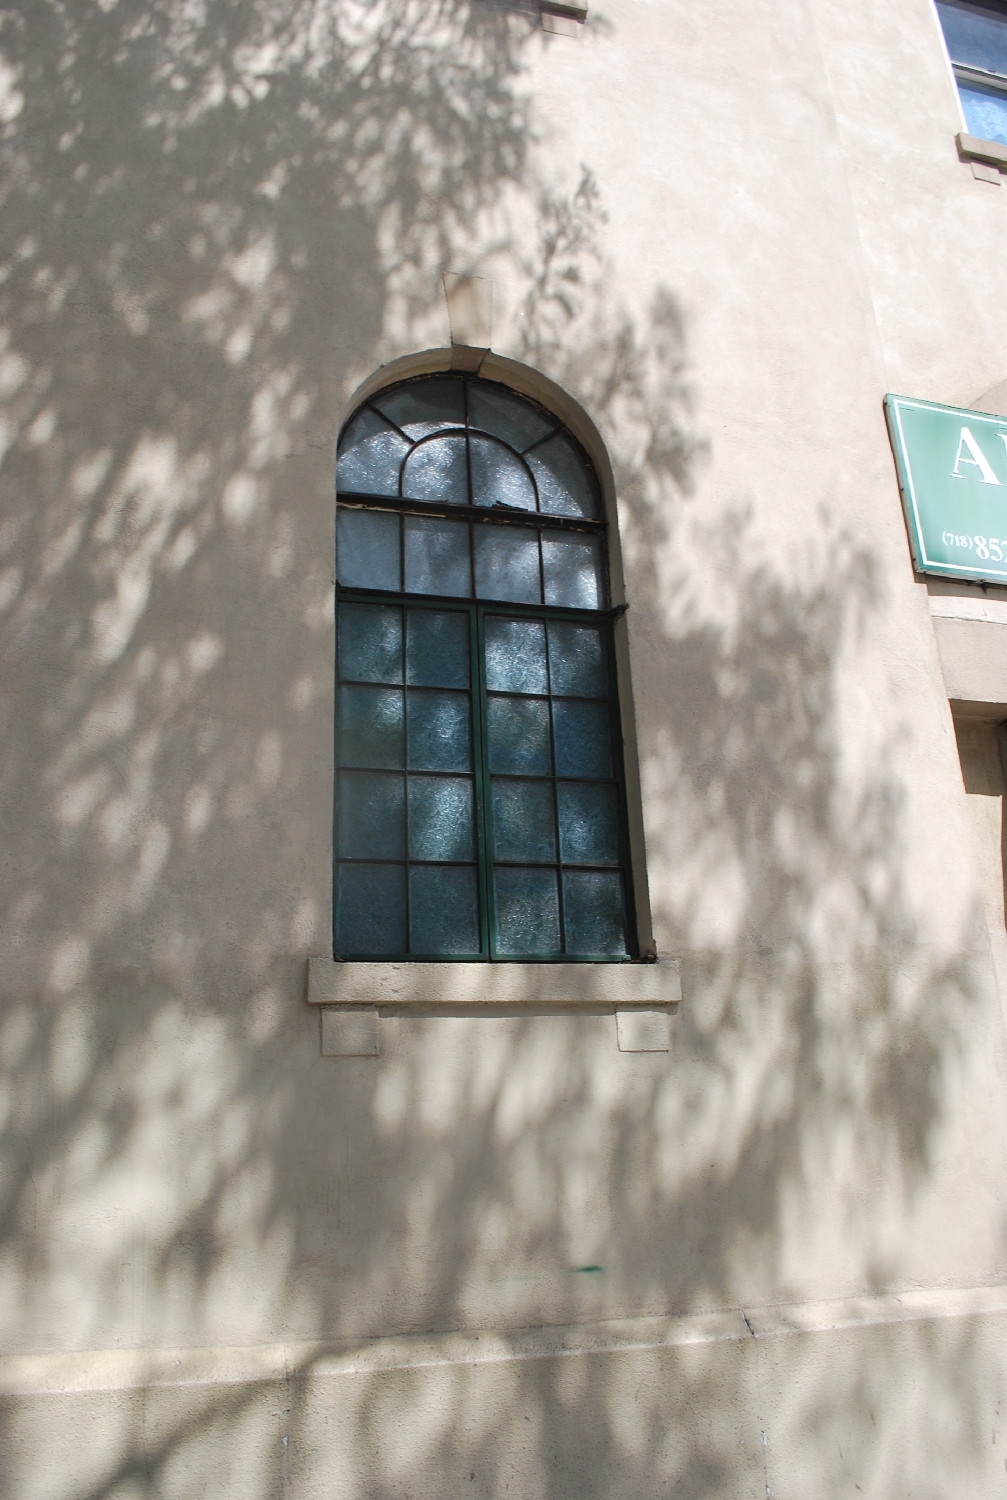 Ahlul Bayt Mosque - Arched window on front facade